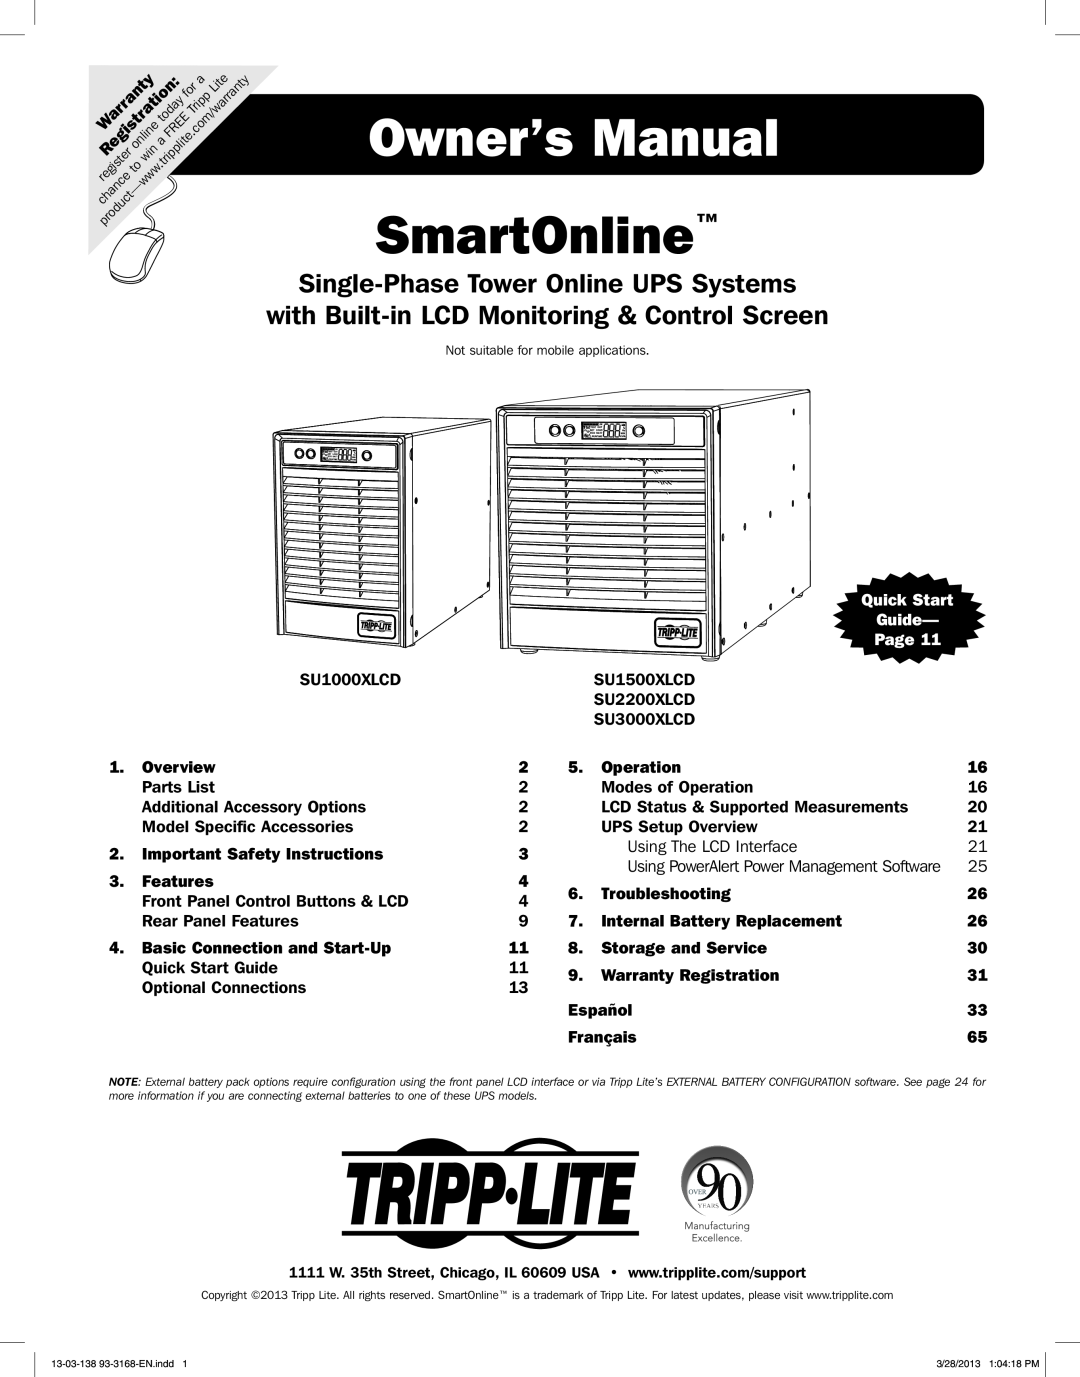 Tripp Lite SU1000XLCD owner manual Owner’s Manual, Single-Phase Tower Online UPS Systems, Overview, Operation, Parts List 